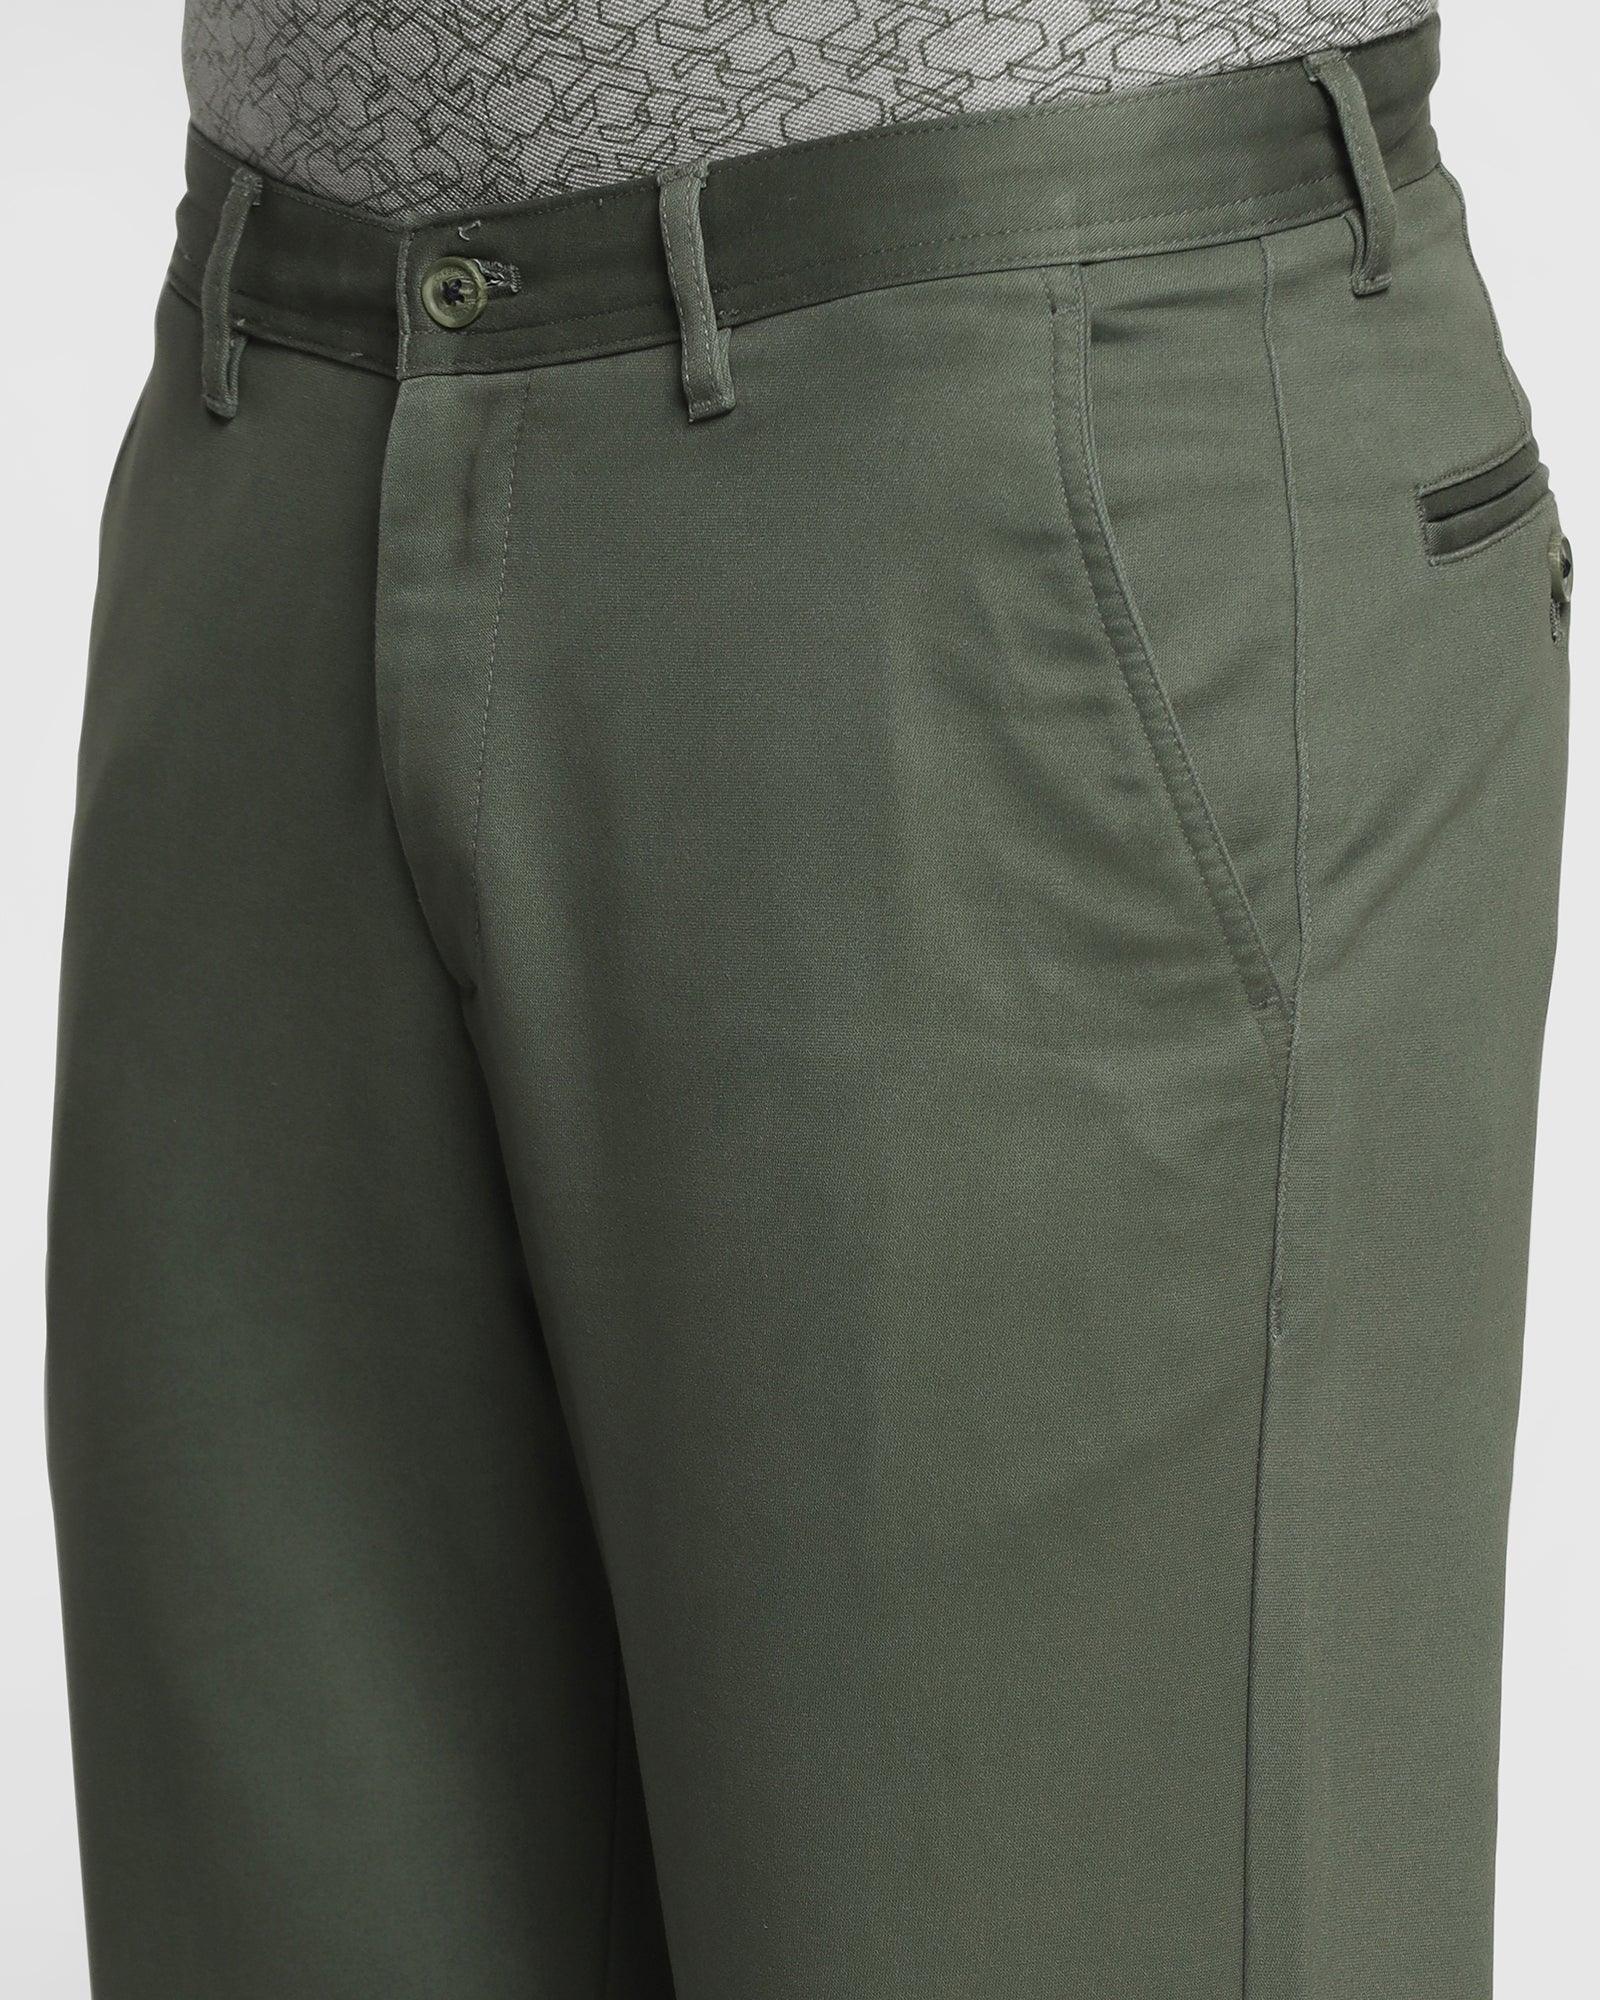 Straight B-90 Casual Olive Solid Khakis - Clate